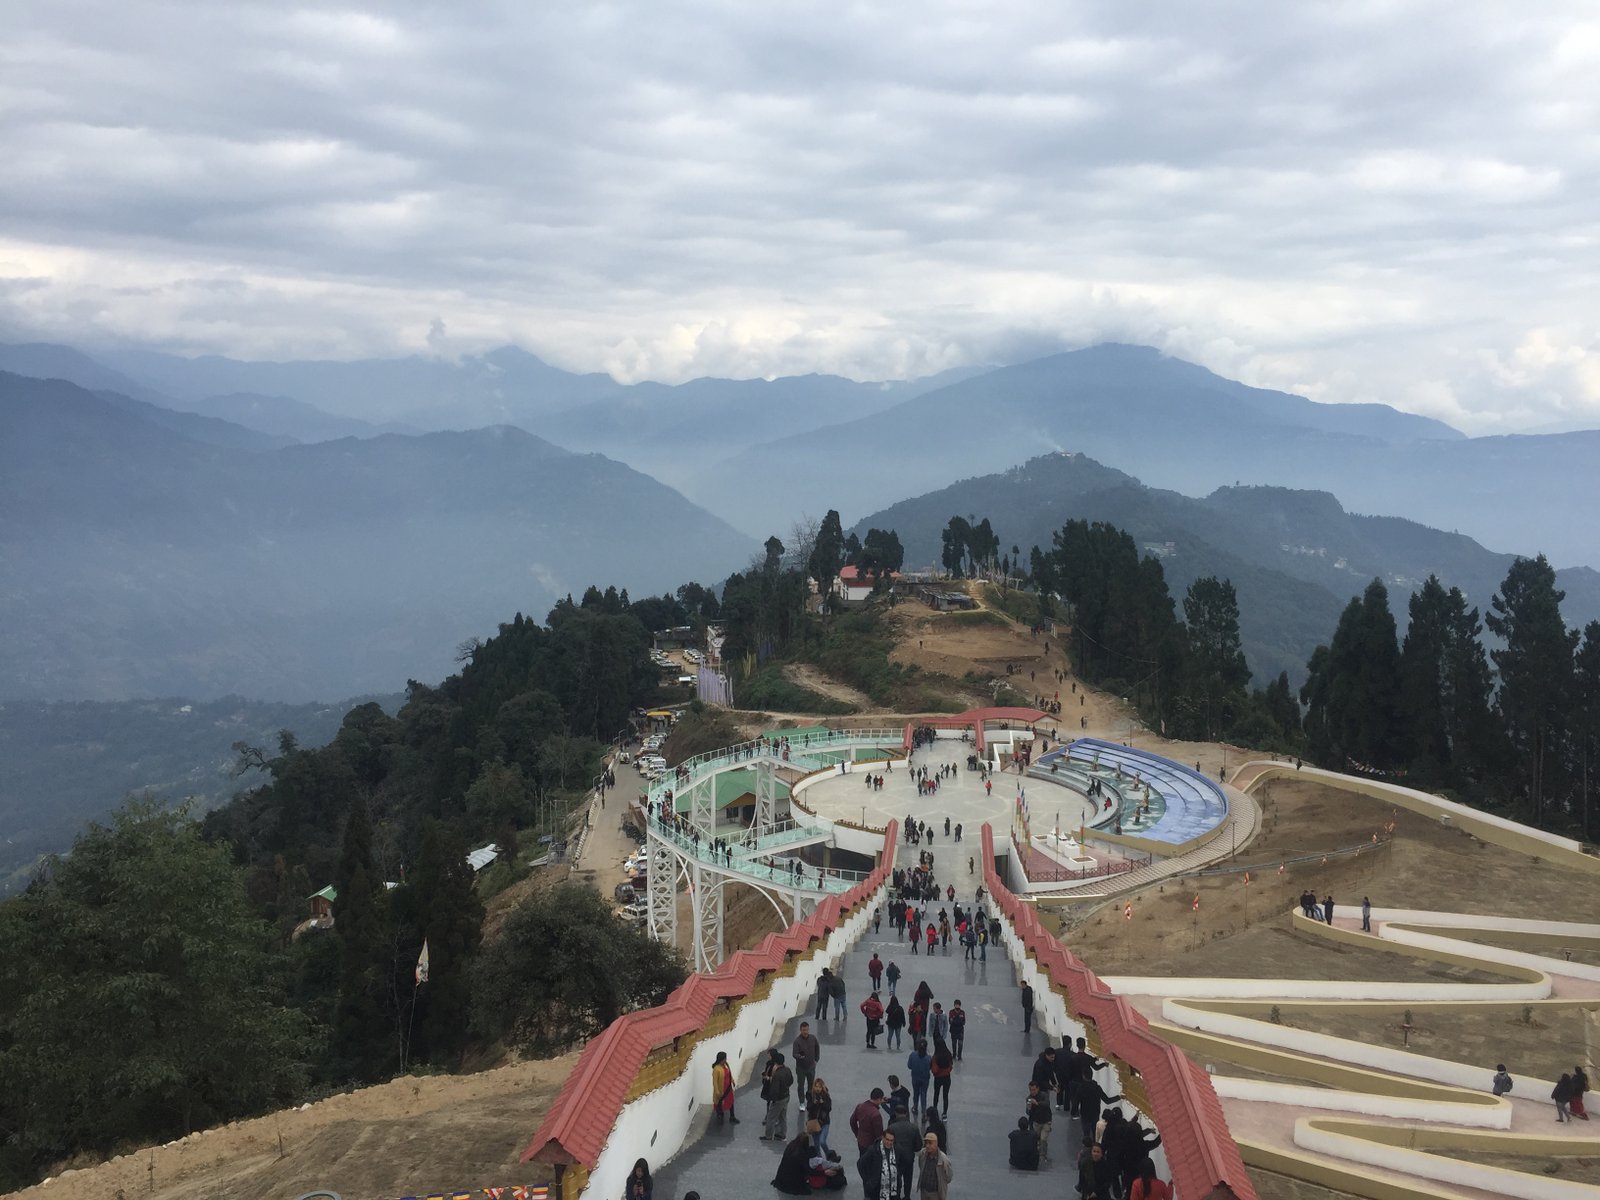 Travel Articles | Travel Blogs | Travel News & Information | Travel Guide |  India.comTop 4 Experiences to Have in Pelling, a Lovely Hill Station in  Sikkim | India.com